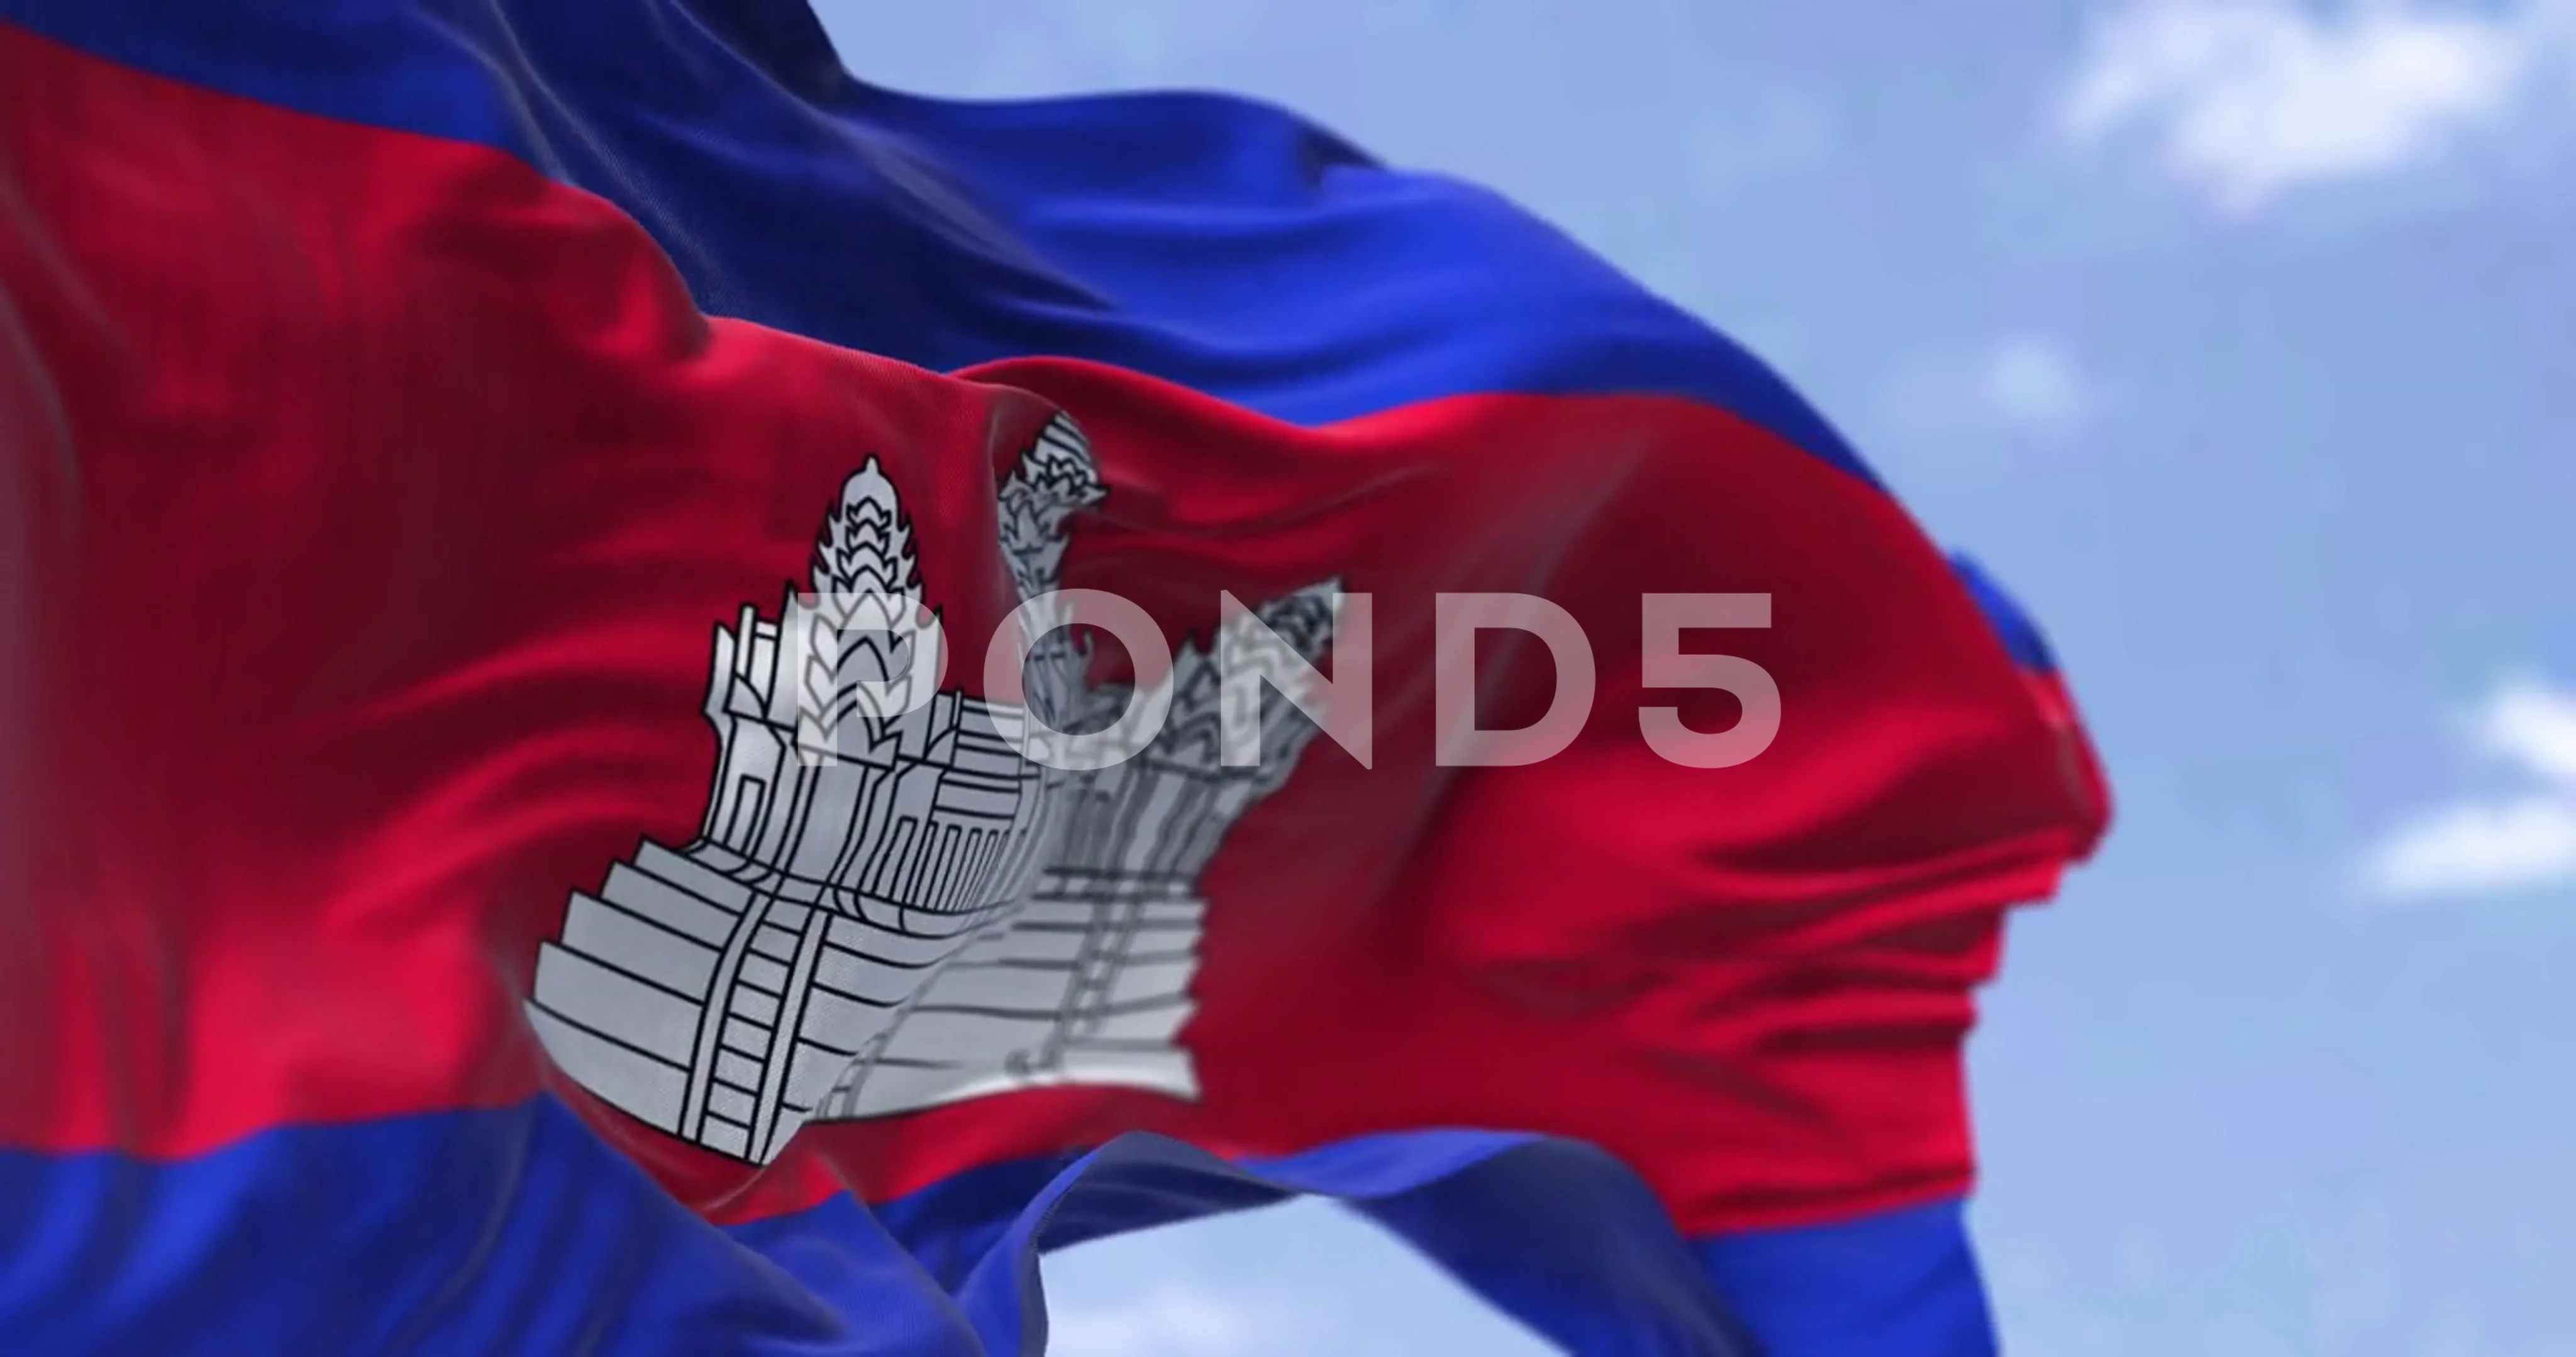 The National Flag of Cambodia